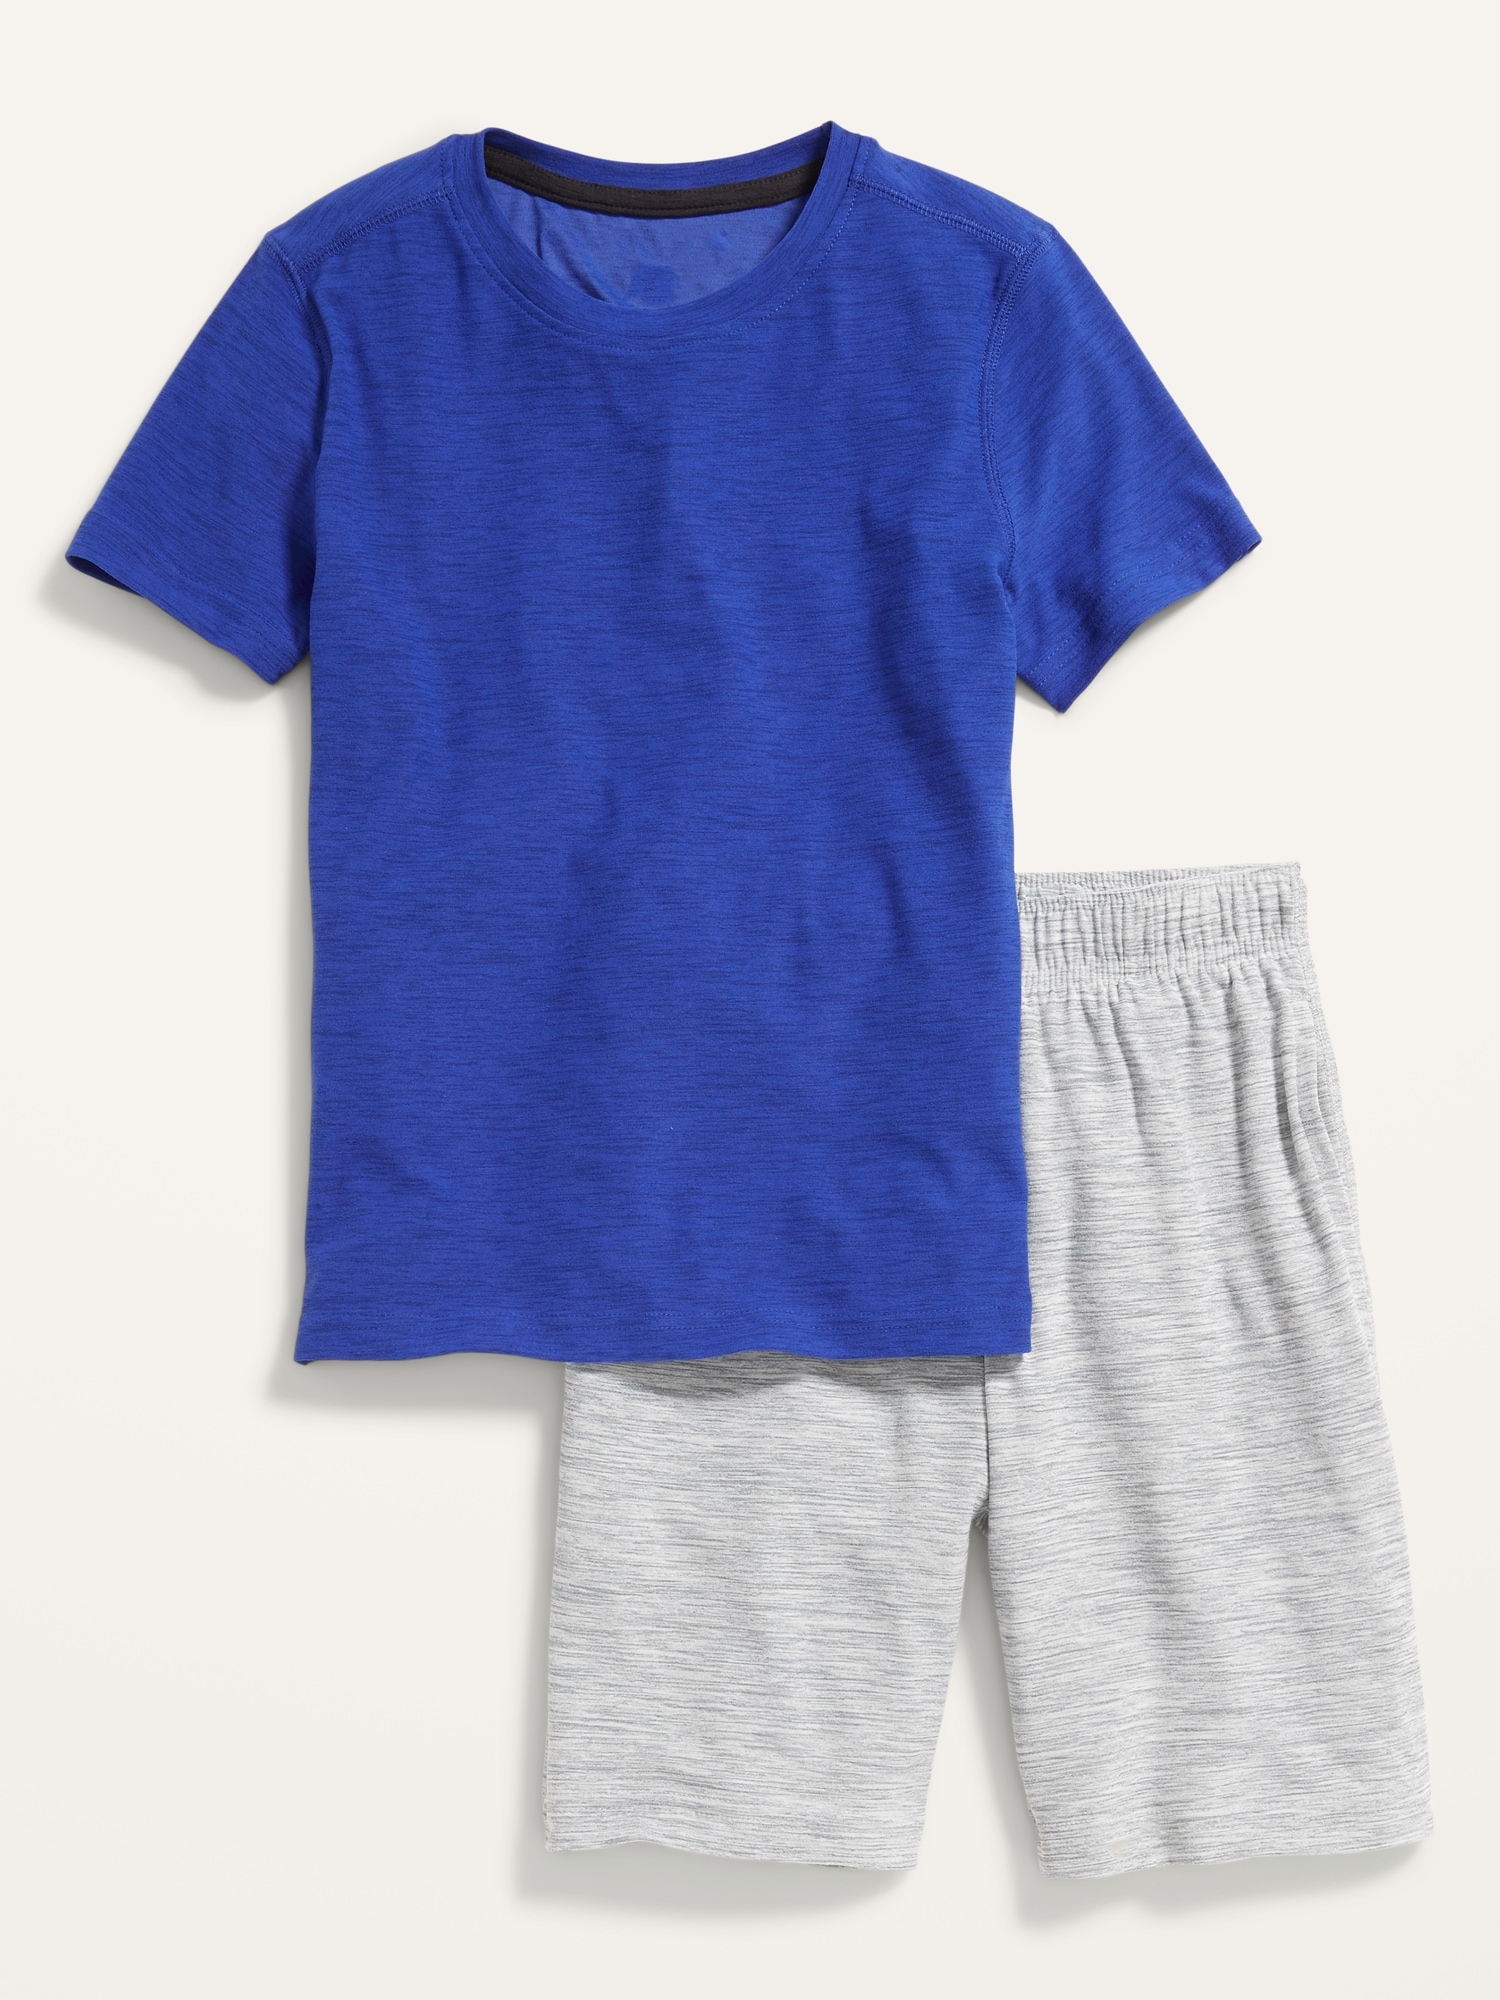 Old Navy Breathe On Tee And Shorts Set For Boys multi. 1